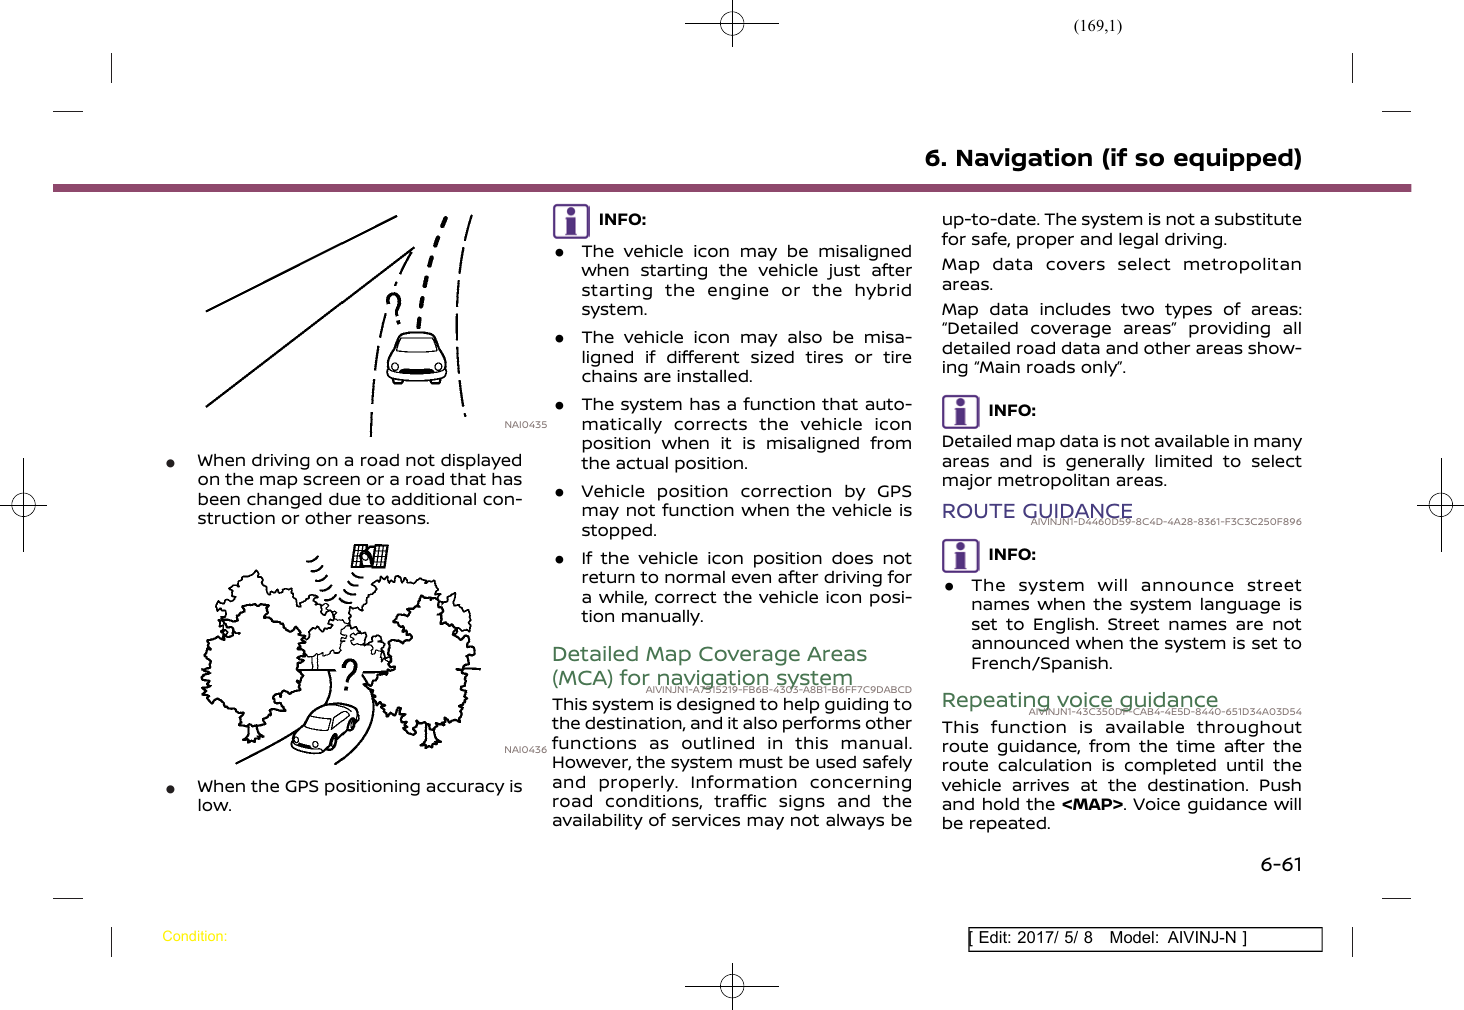 Page 169 of Robert Bosch Car Multimedia AIVICMFB0 Navigation System with Bluetooth and WLAN User Manual